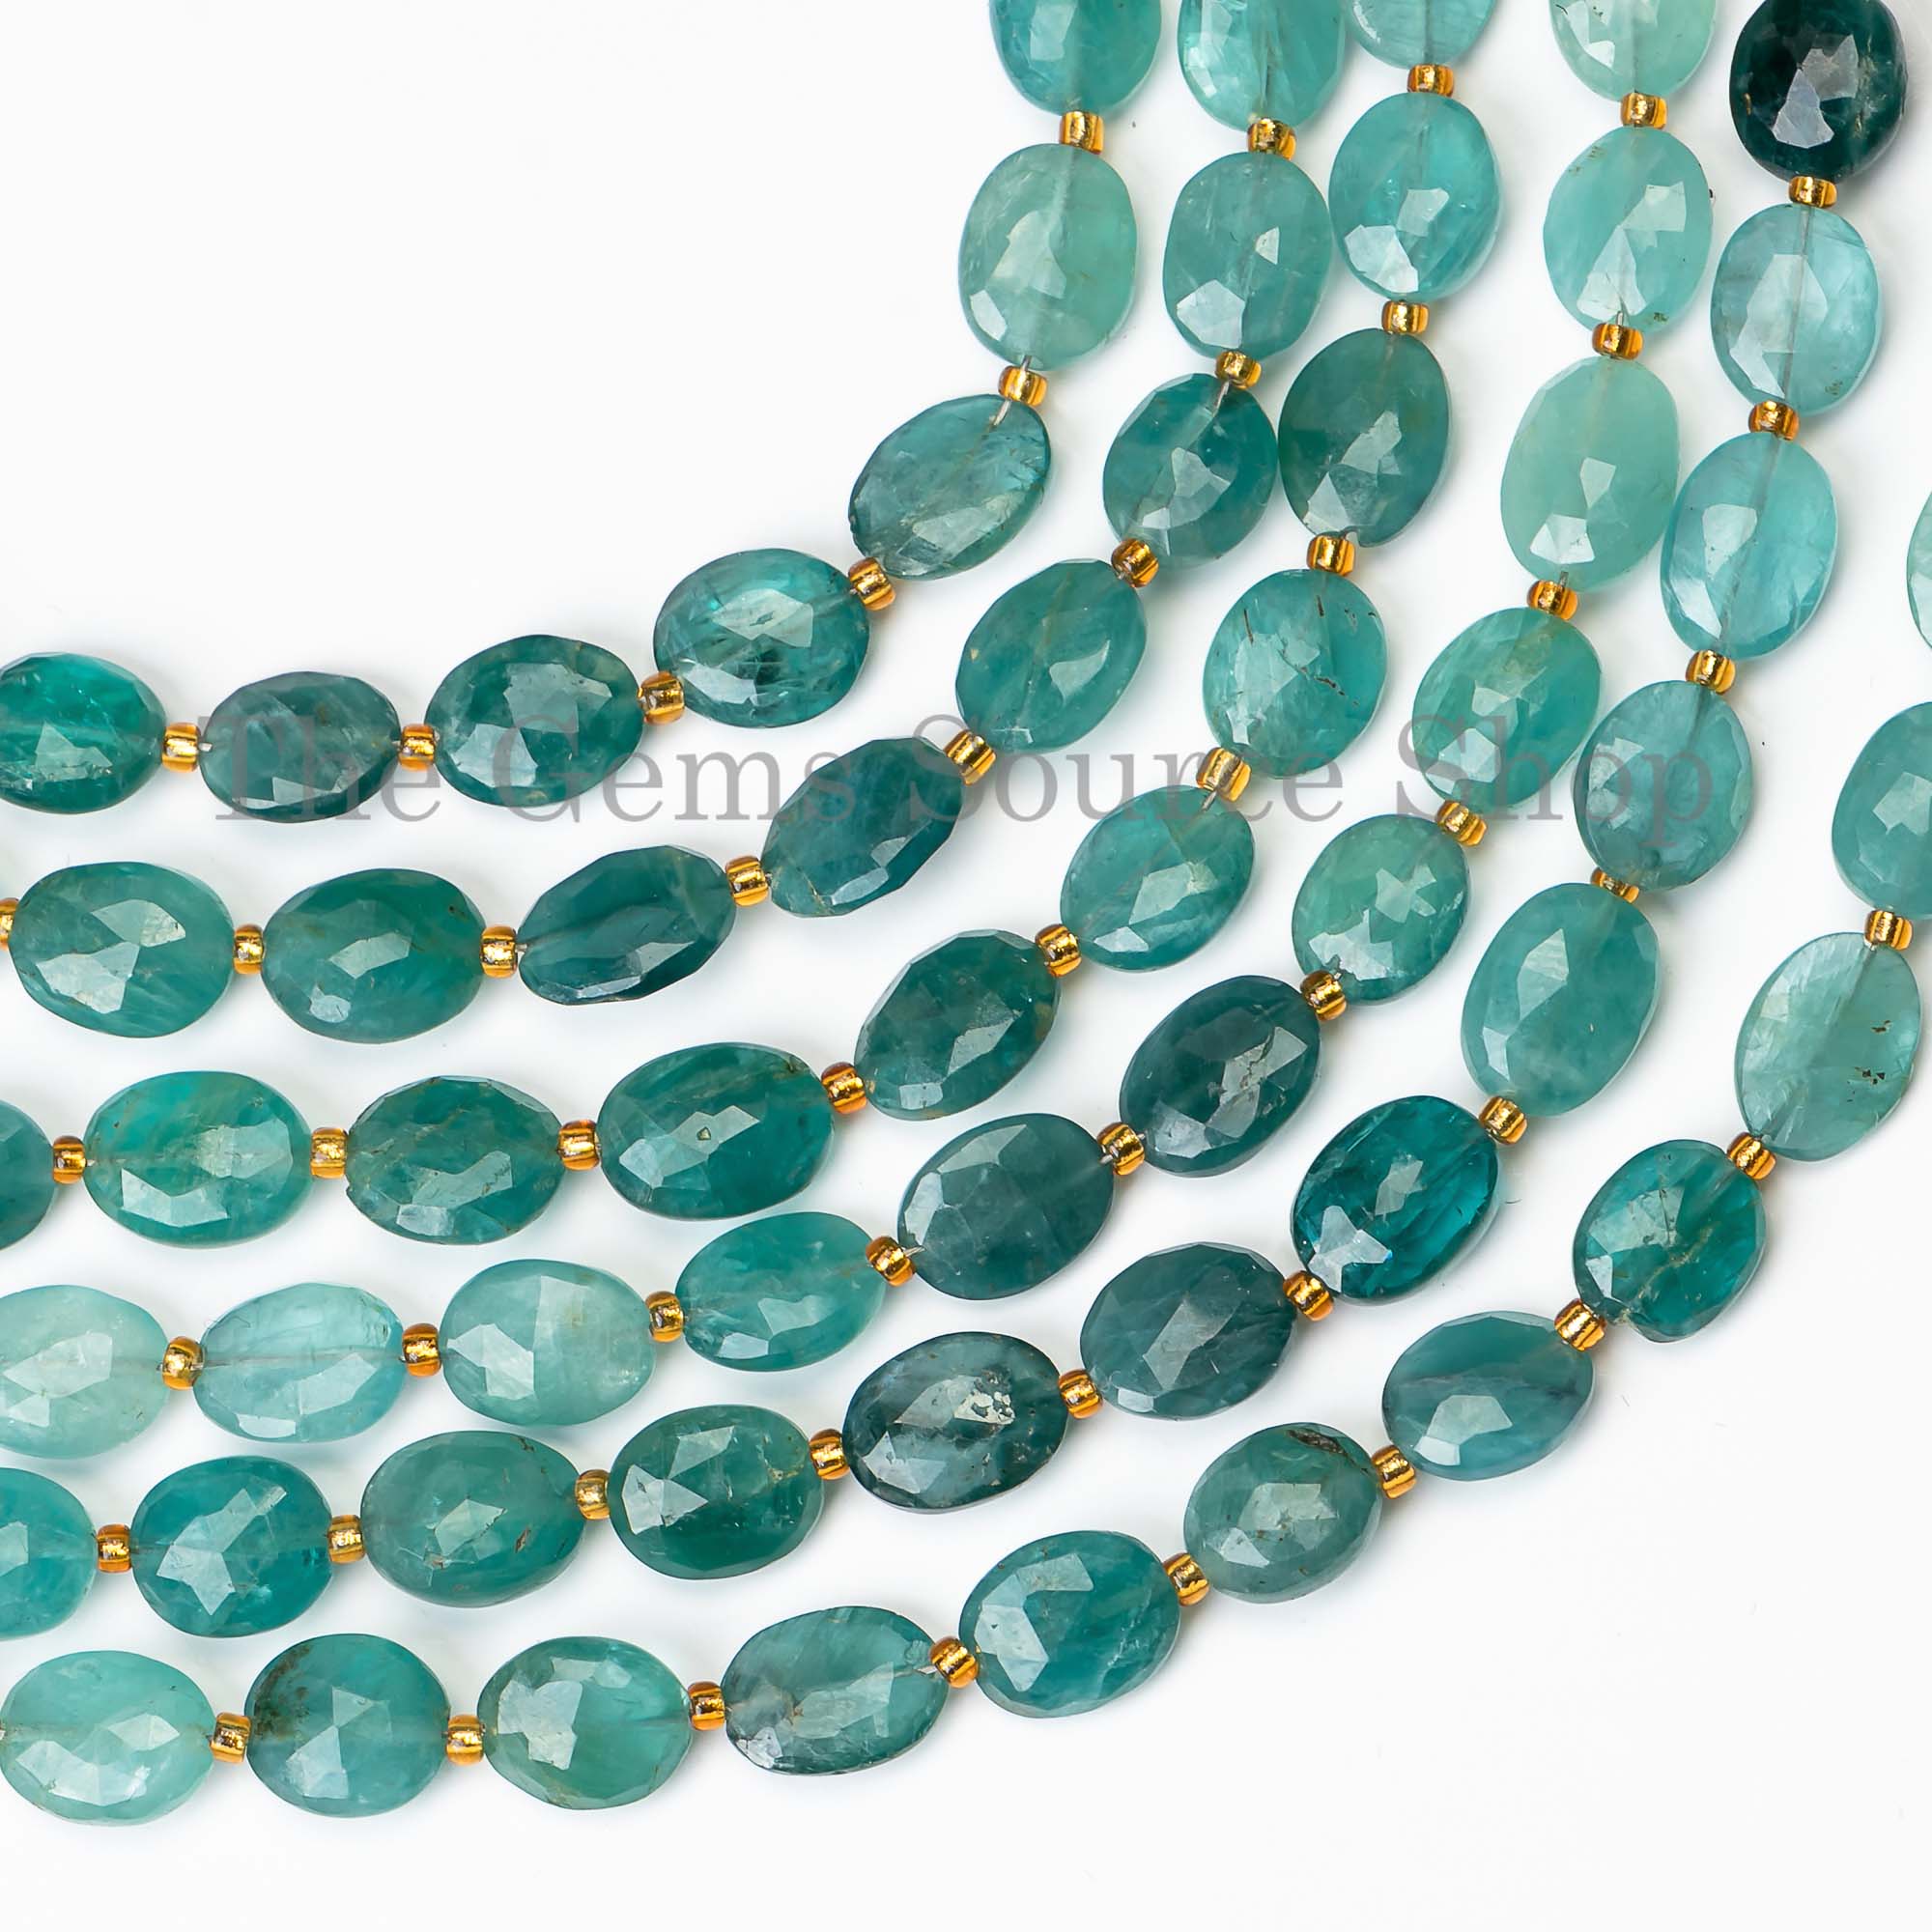 Extremely Natural Grandidierite Faceted Oval Gemstone Beads Briolette Strand